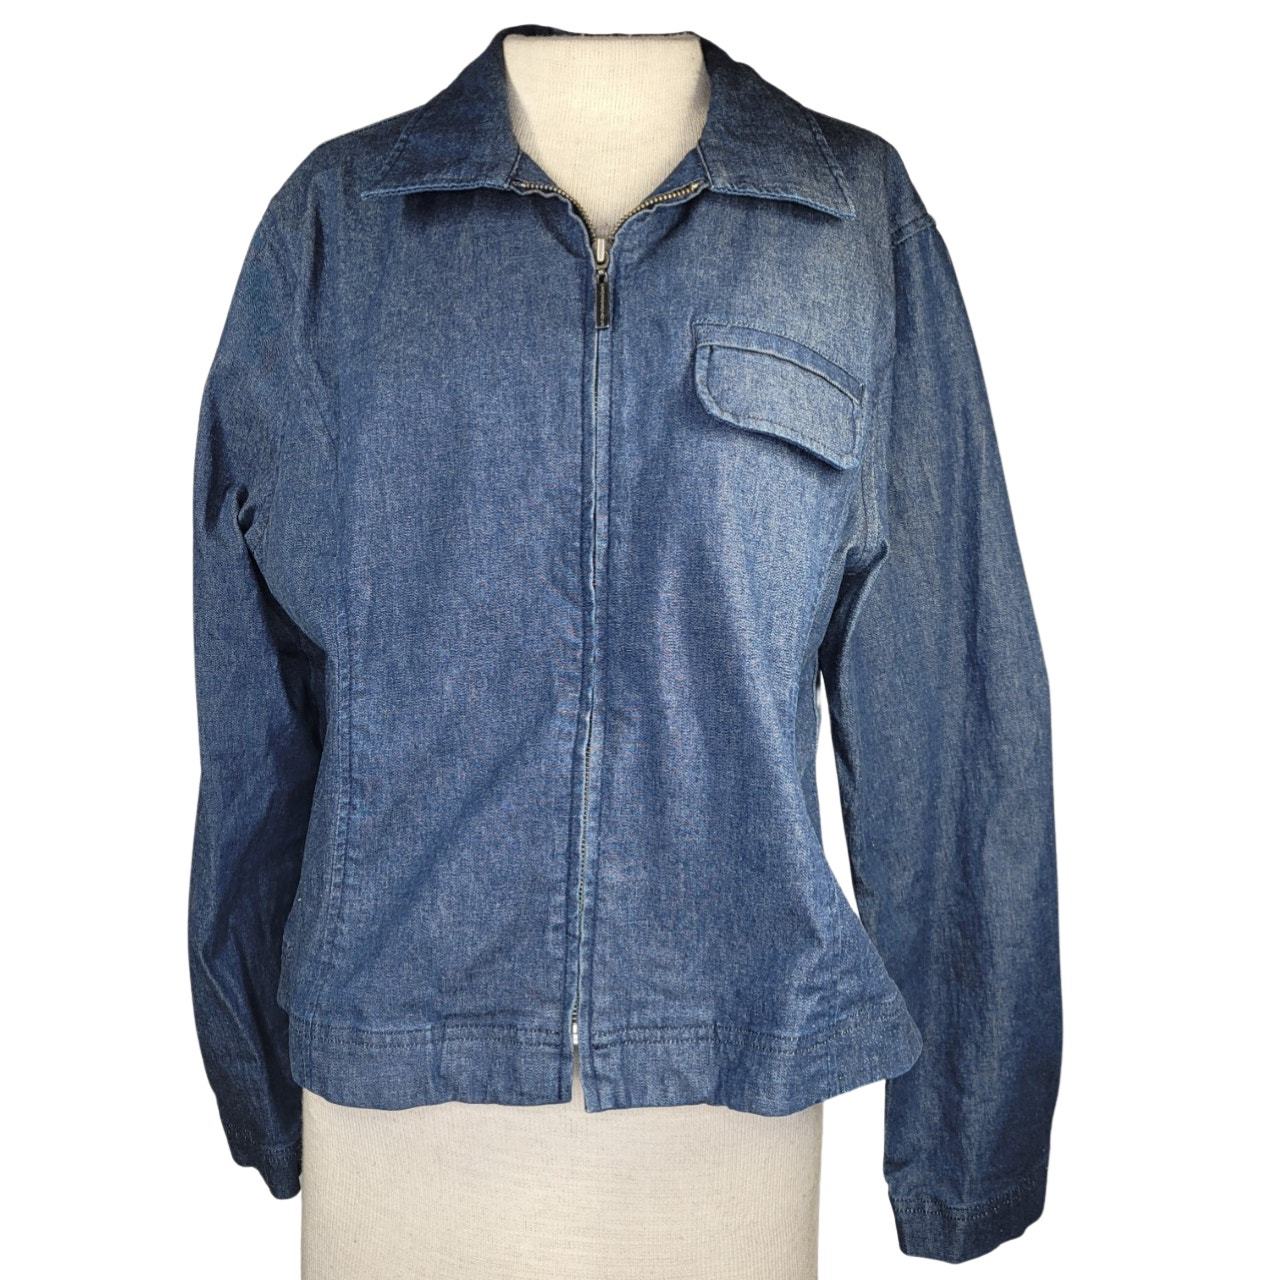 Primary image for Blue Zip Up Jean Jacket size 16